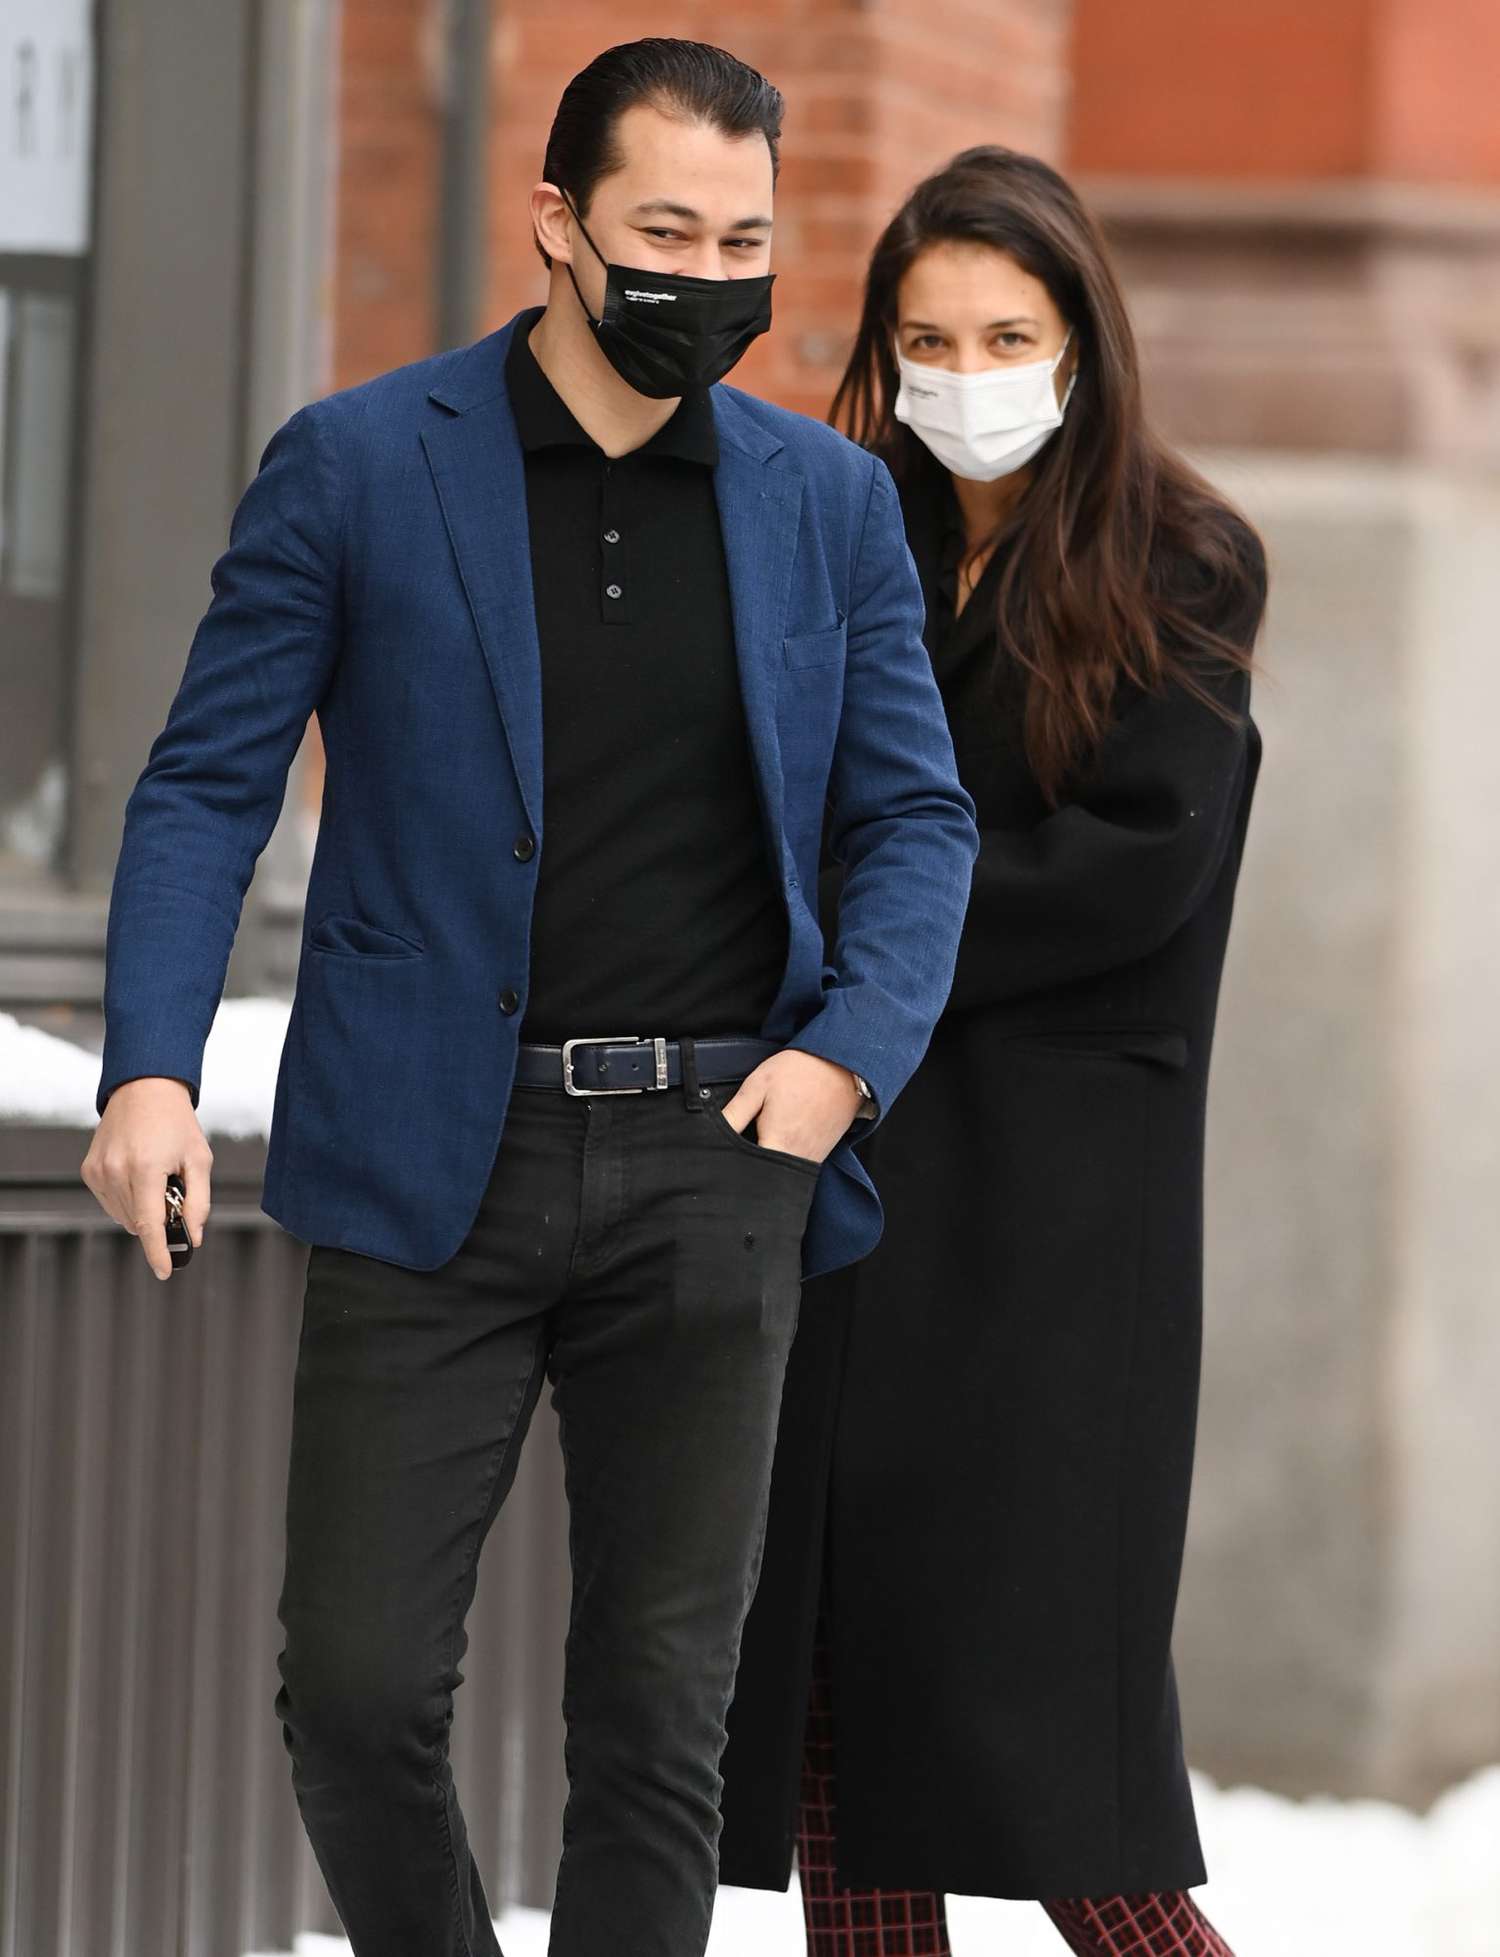 Katie Holmes Spotted Out For A Walk On Her 42nd Birthday With Her Boyfriend Emilio Vitolo A Day After A Heavy Snow Storm In New York City